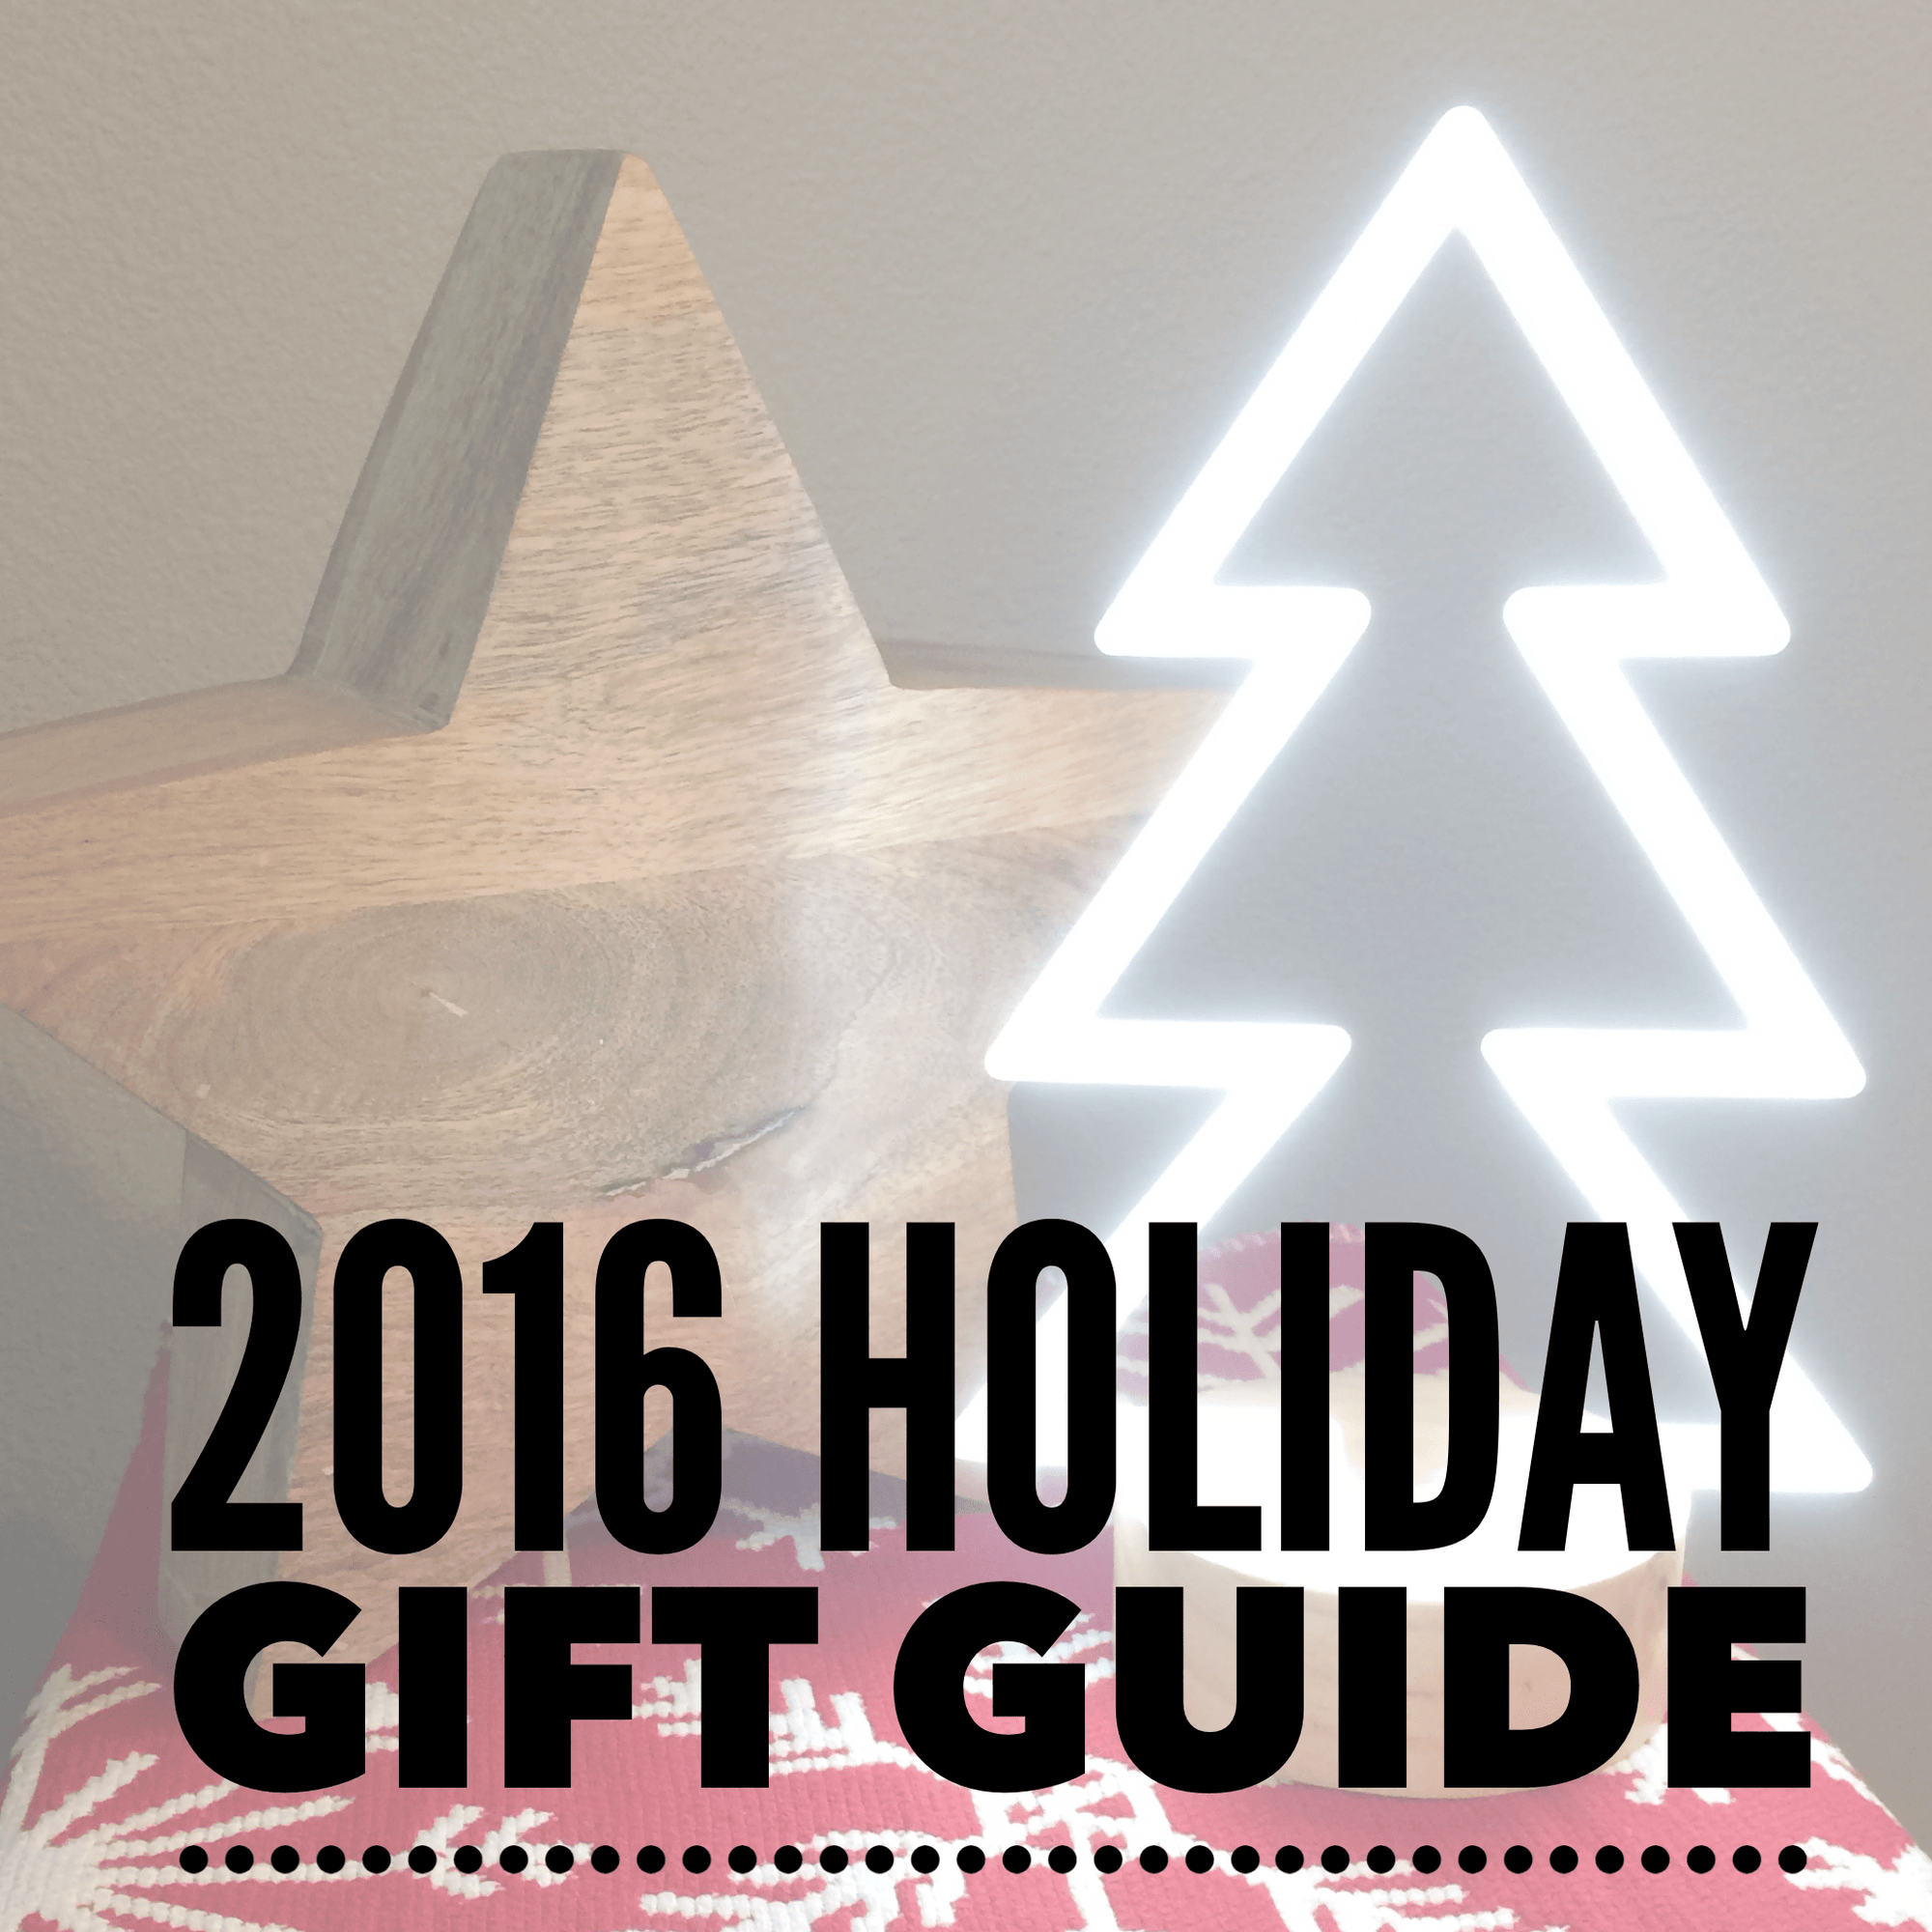 Our 2016 Holiday Gift Guide